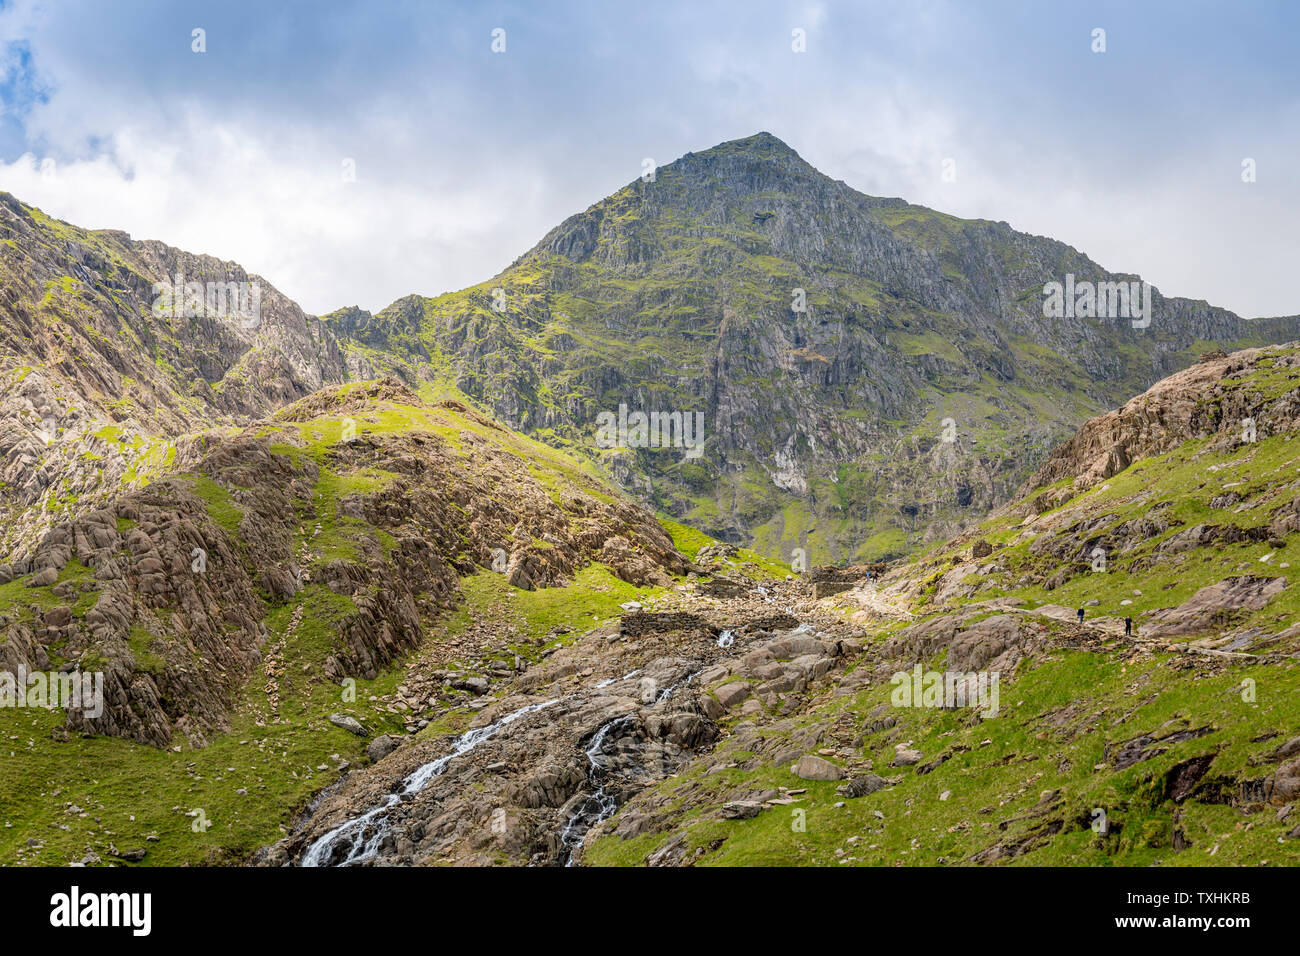 The east face of Snowdon (3,560ft) as viewed from the Miners Track, Snowdonia National Park, Gwynedd, Wales, UK Stock Photo